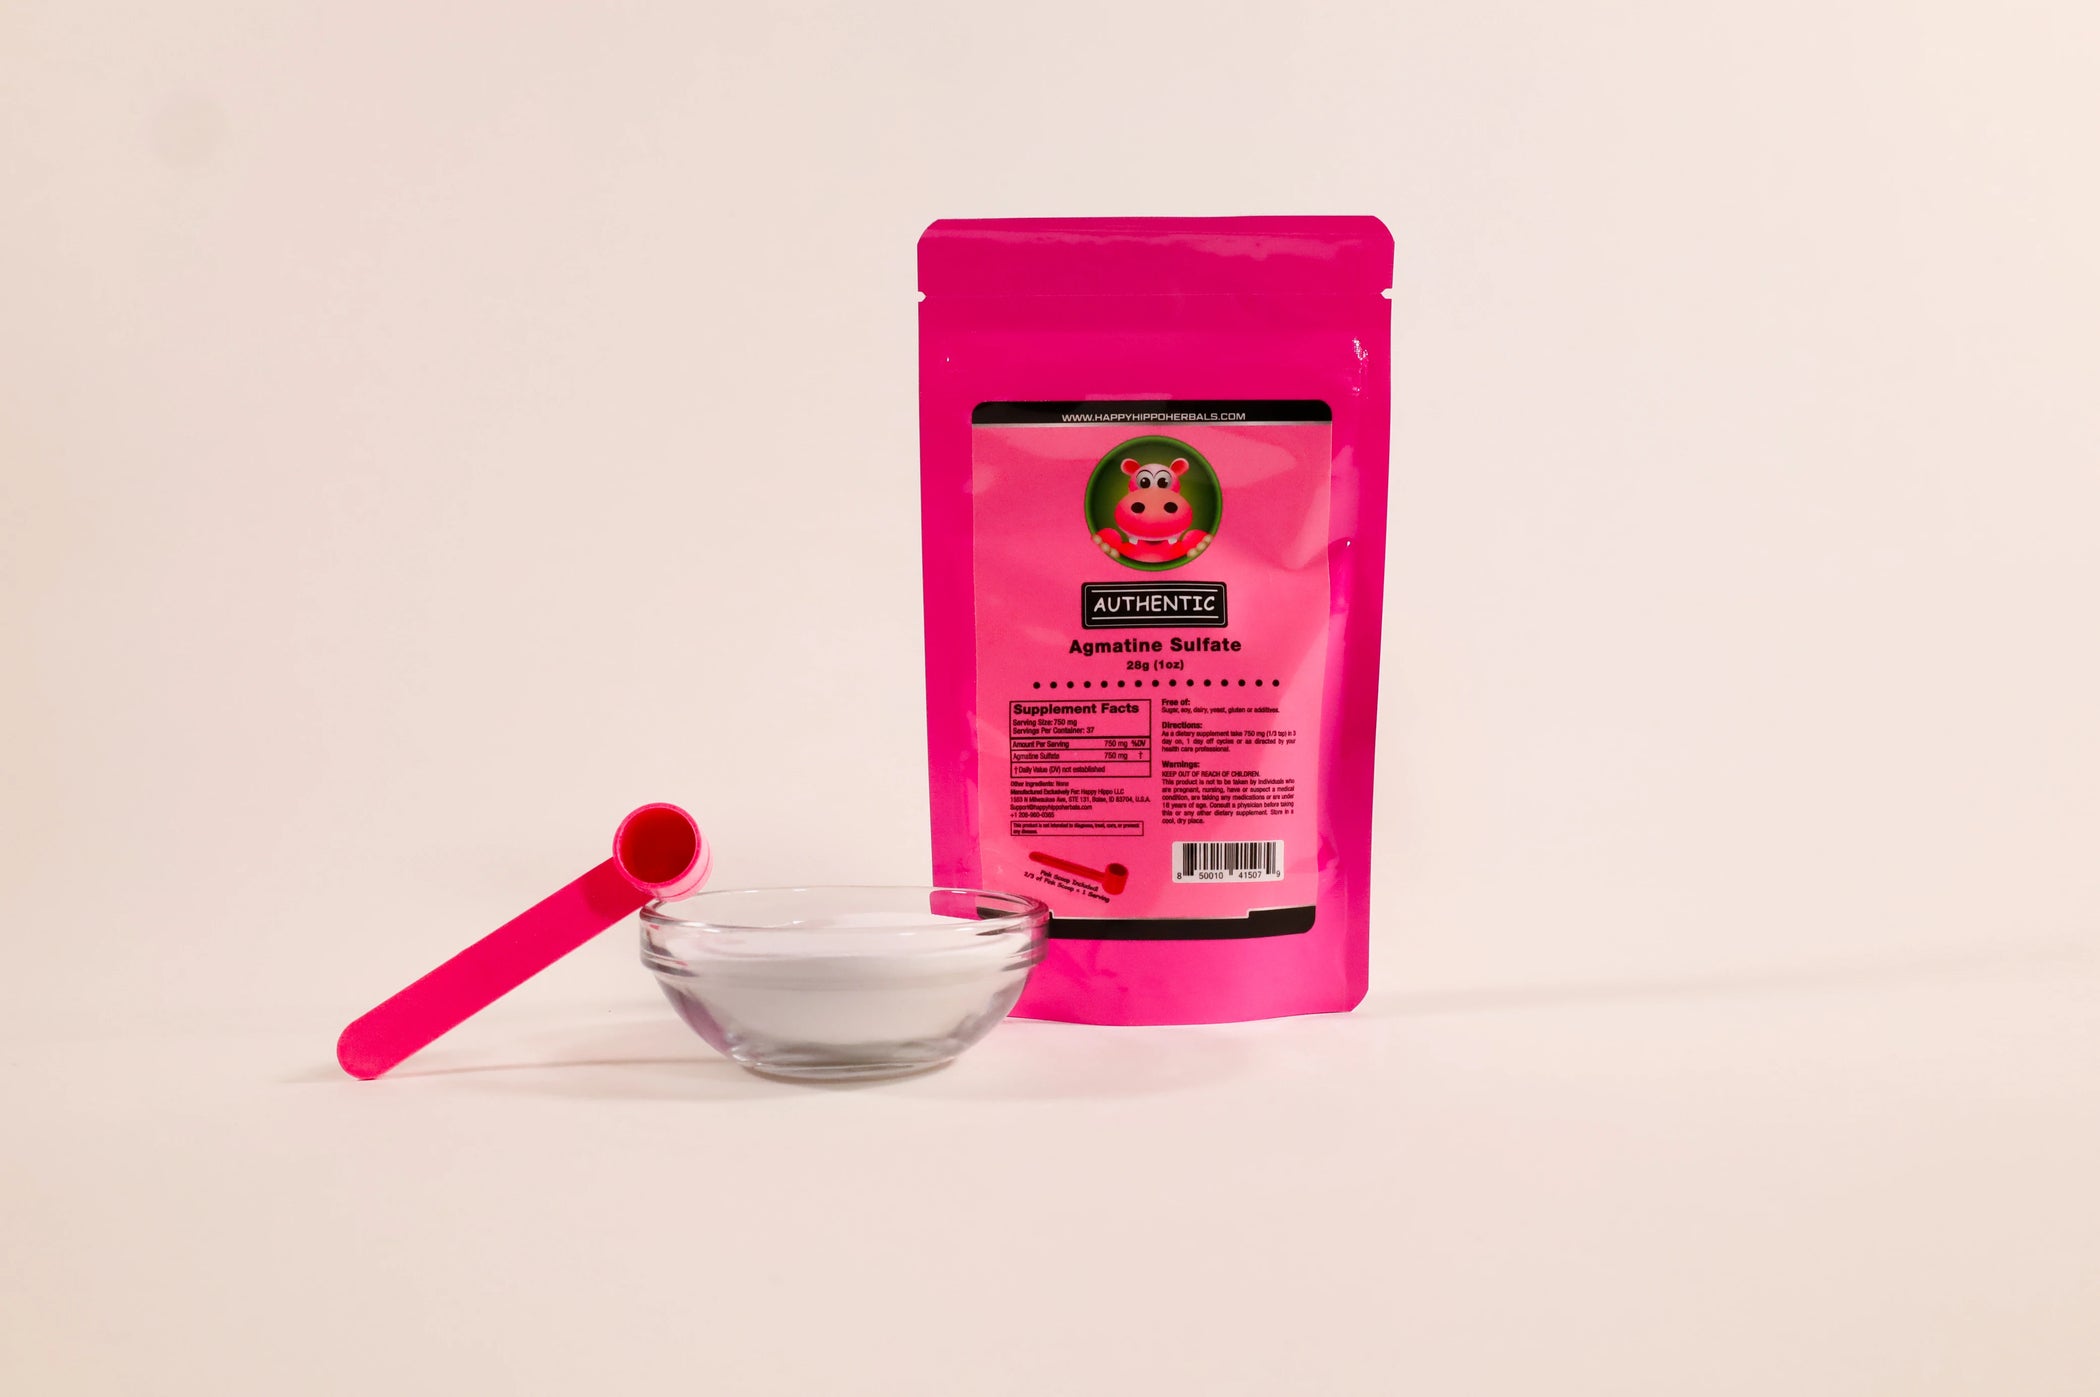 Product image depicting a 1 ounce packet of Happy Hippo Herbals brand Agmatine Sulfate next to a glass bowl of loose agmatine sulfate powder and a 1 gram little pink measuring scoop